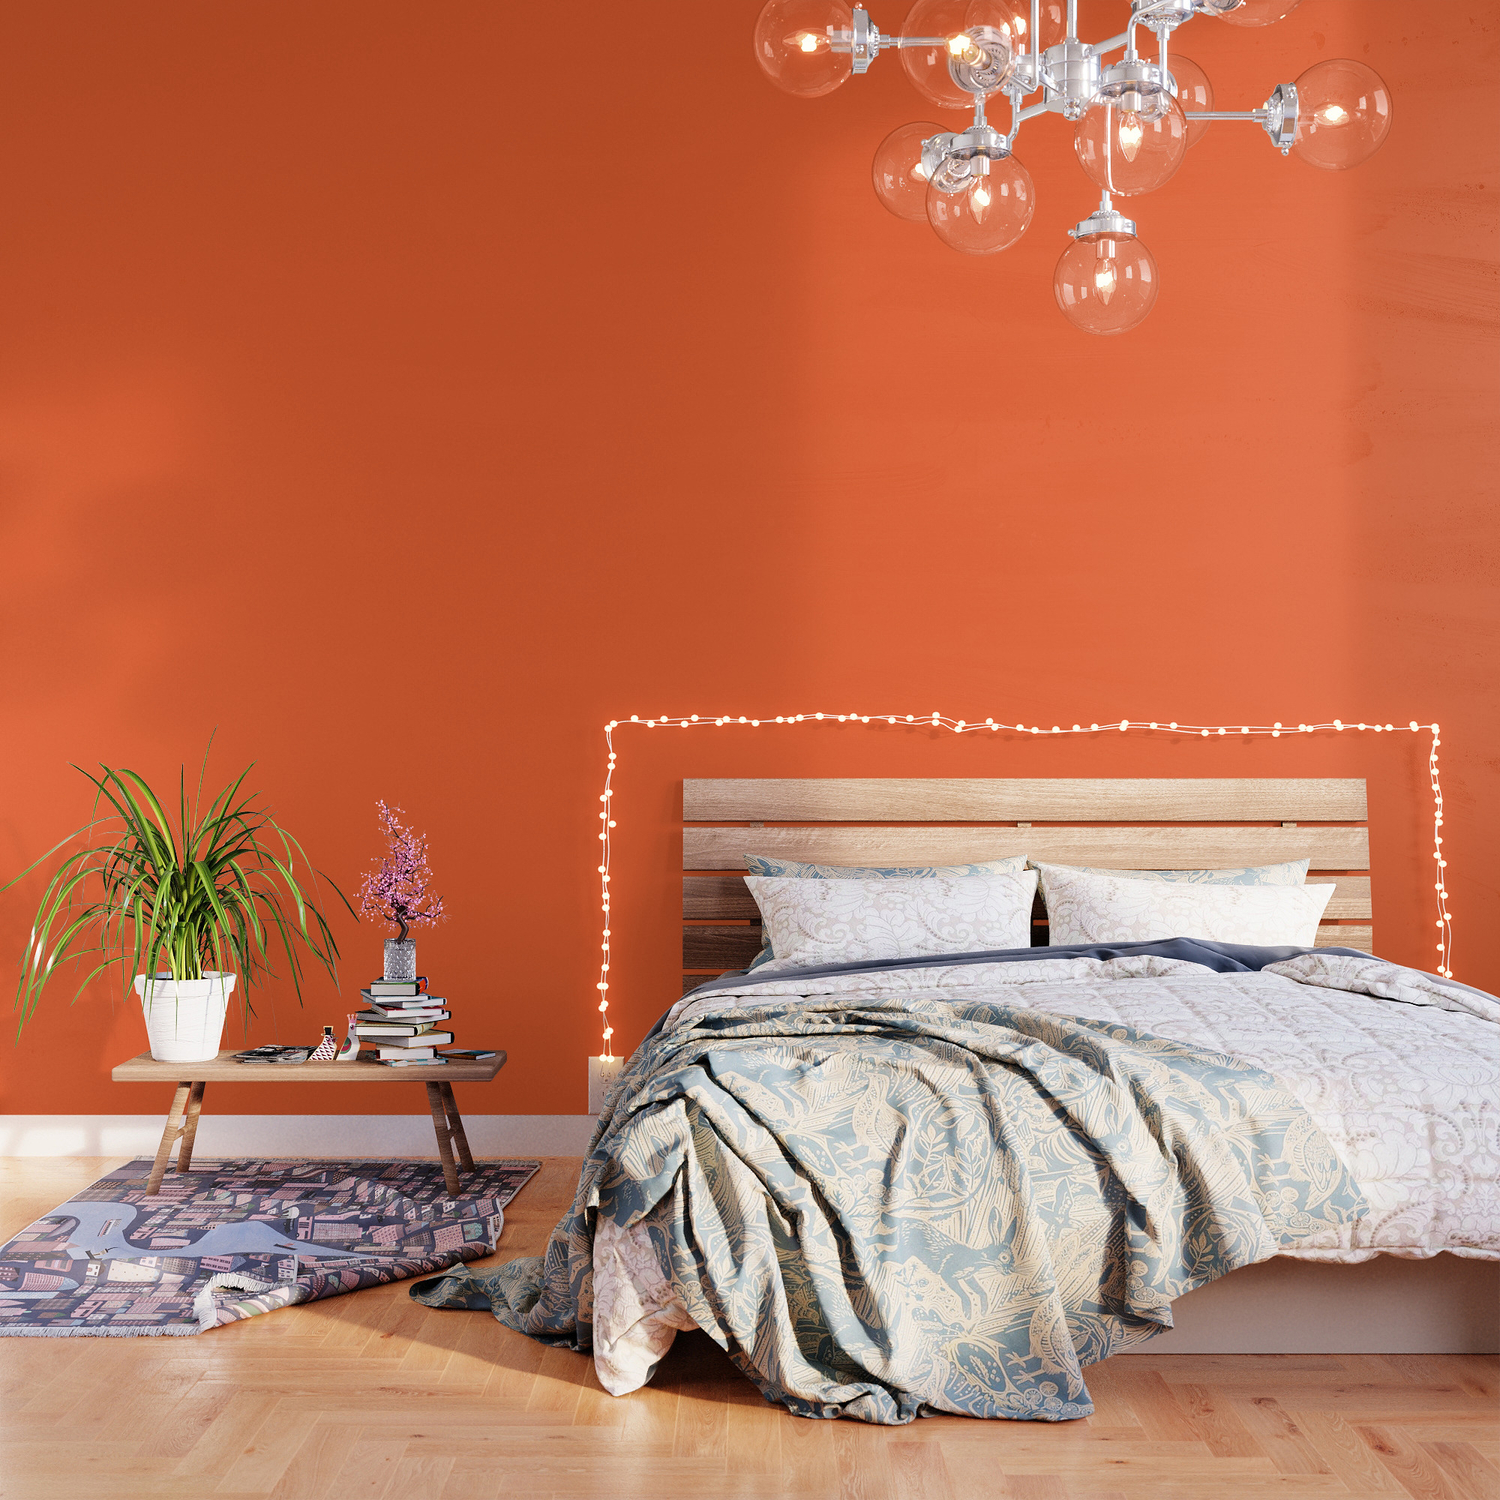 DRAGON FIRE Pure Bright Orange solid color Wallpaper by NOW COLOR | Society6